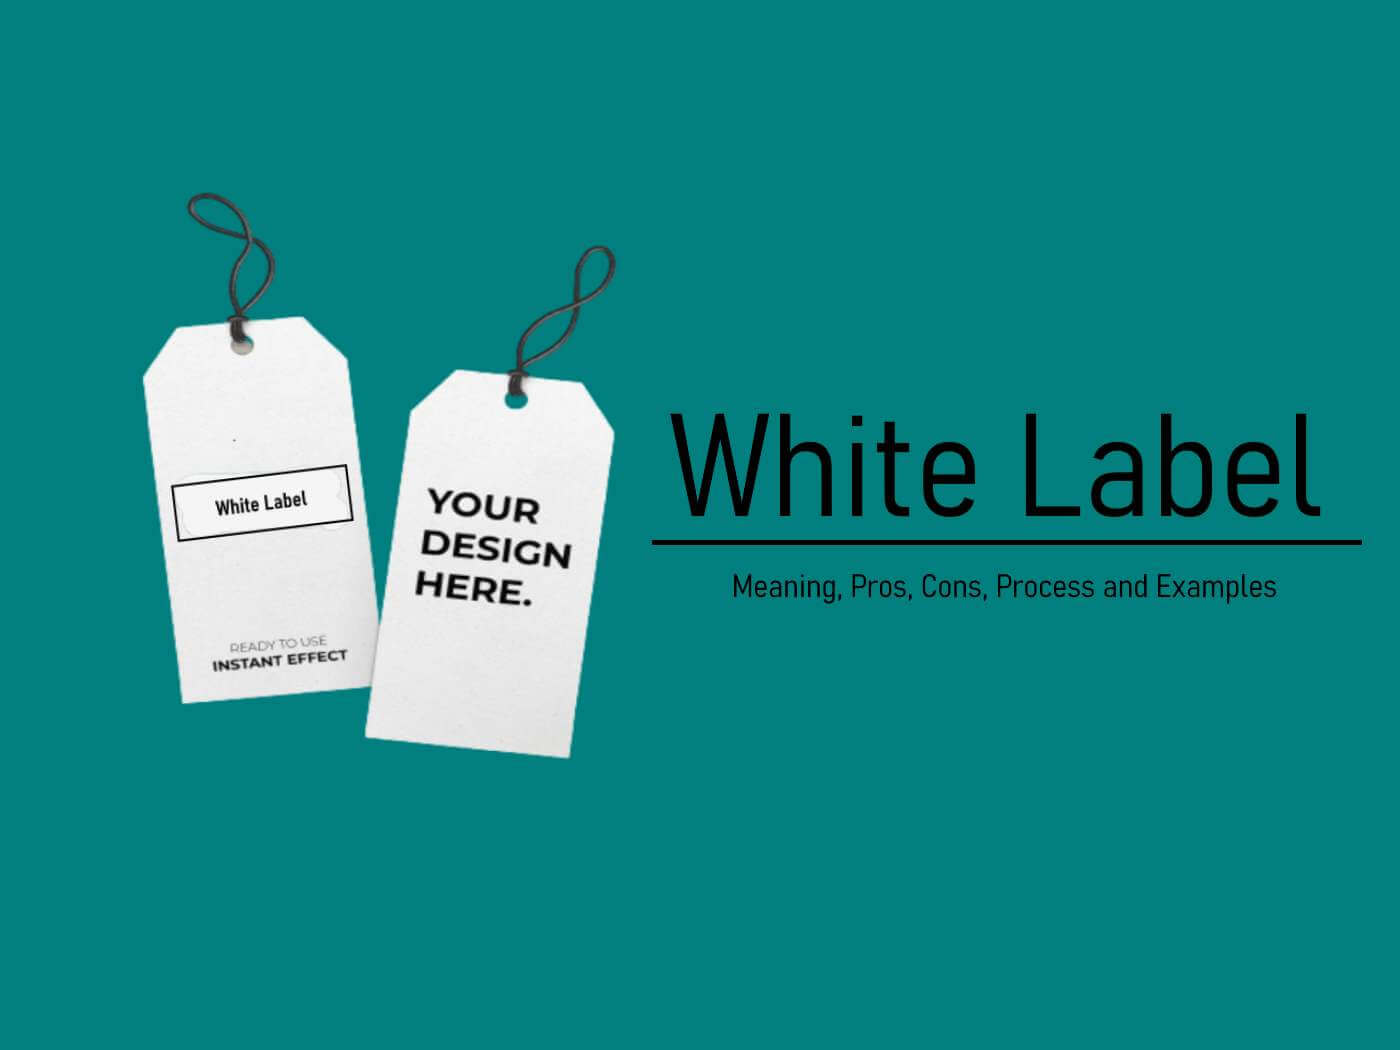 white-label-definition-pros-cons-examples-how-it